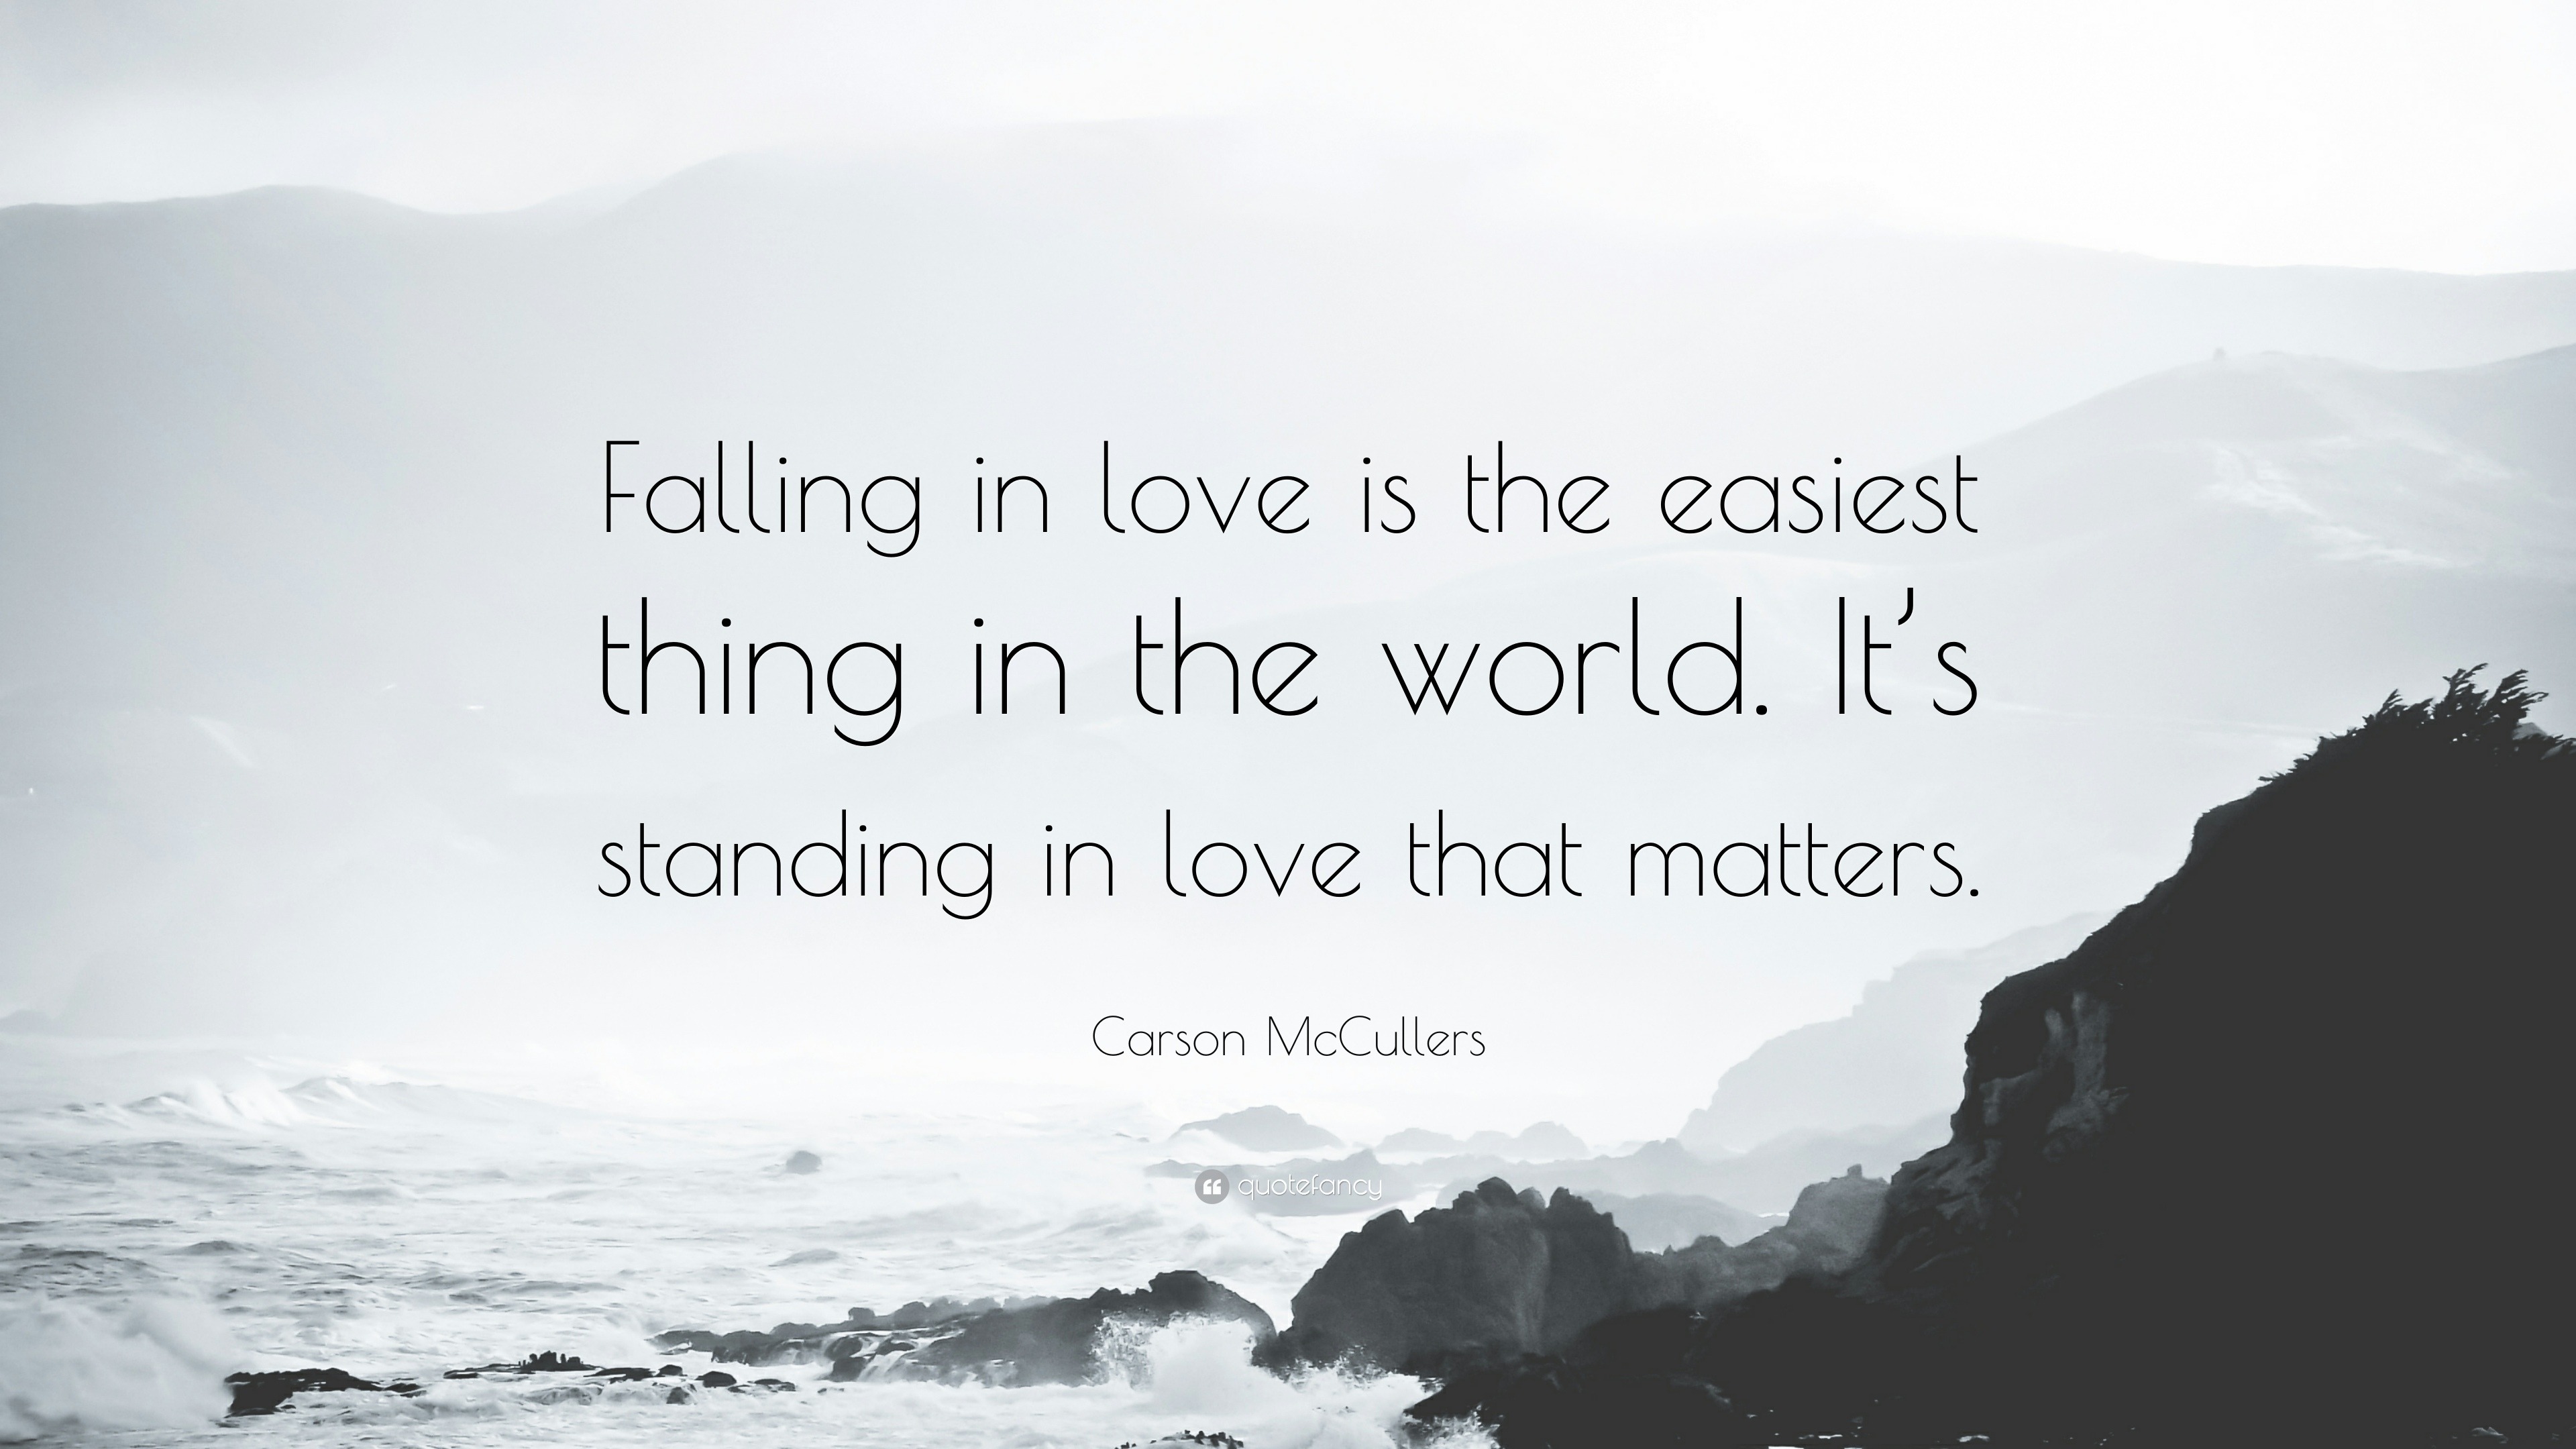 Carson McCullers Quote: “Falling in love is the easiest thing in the ...